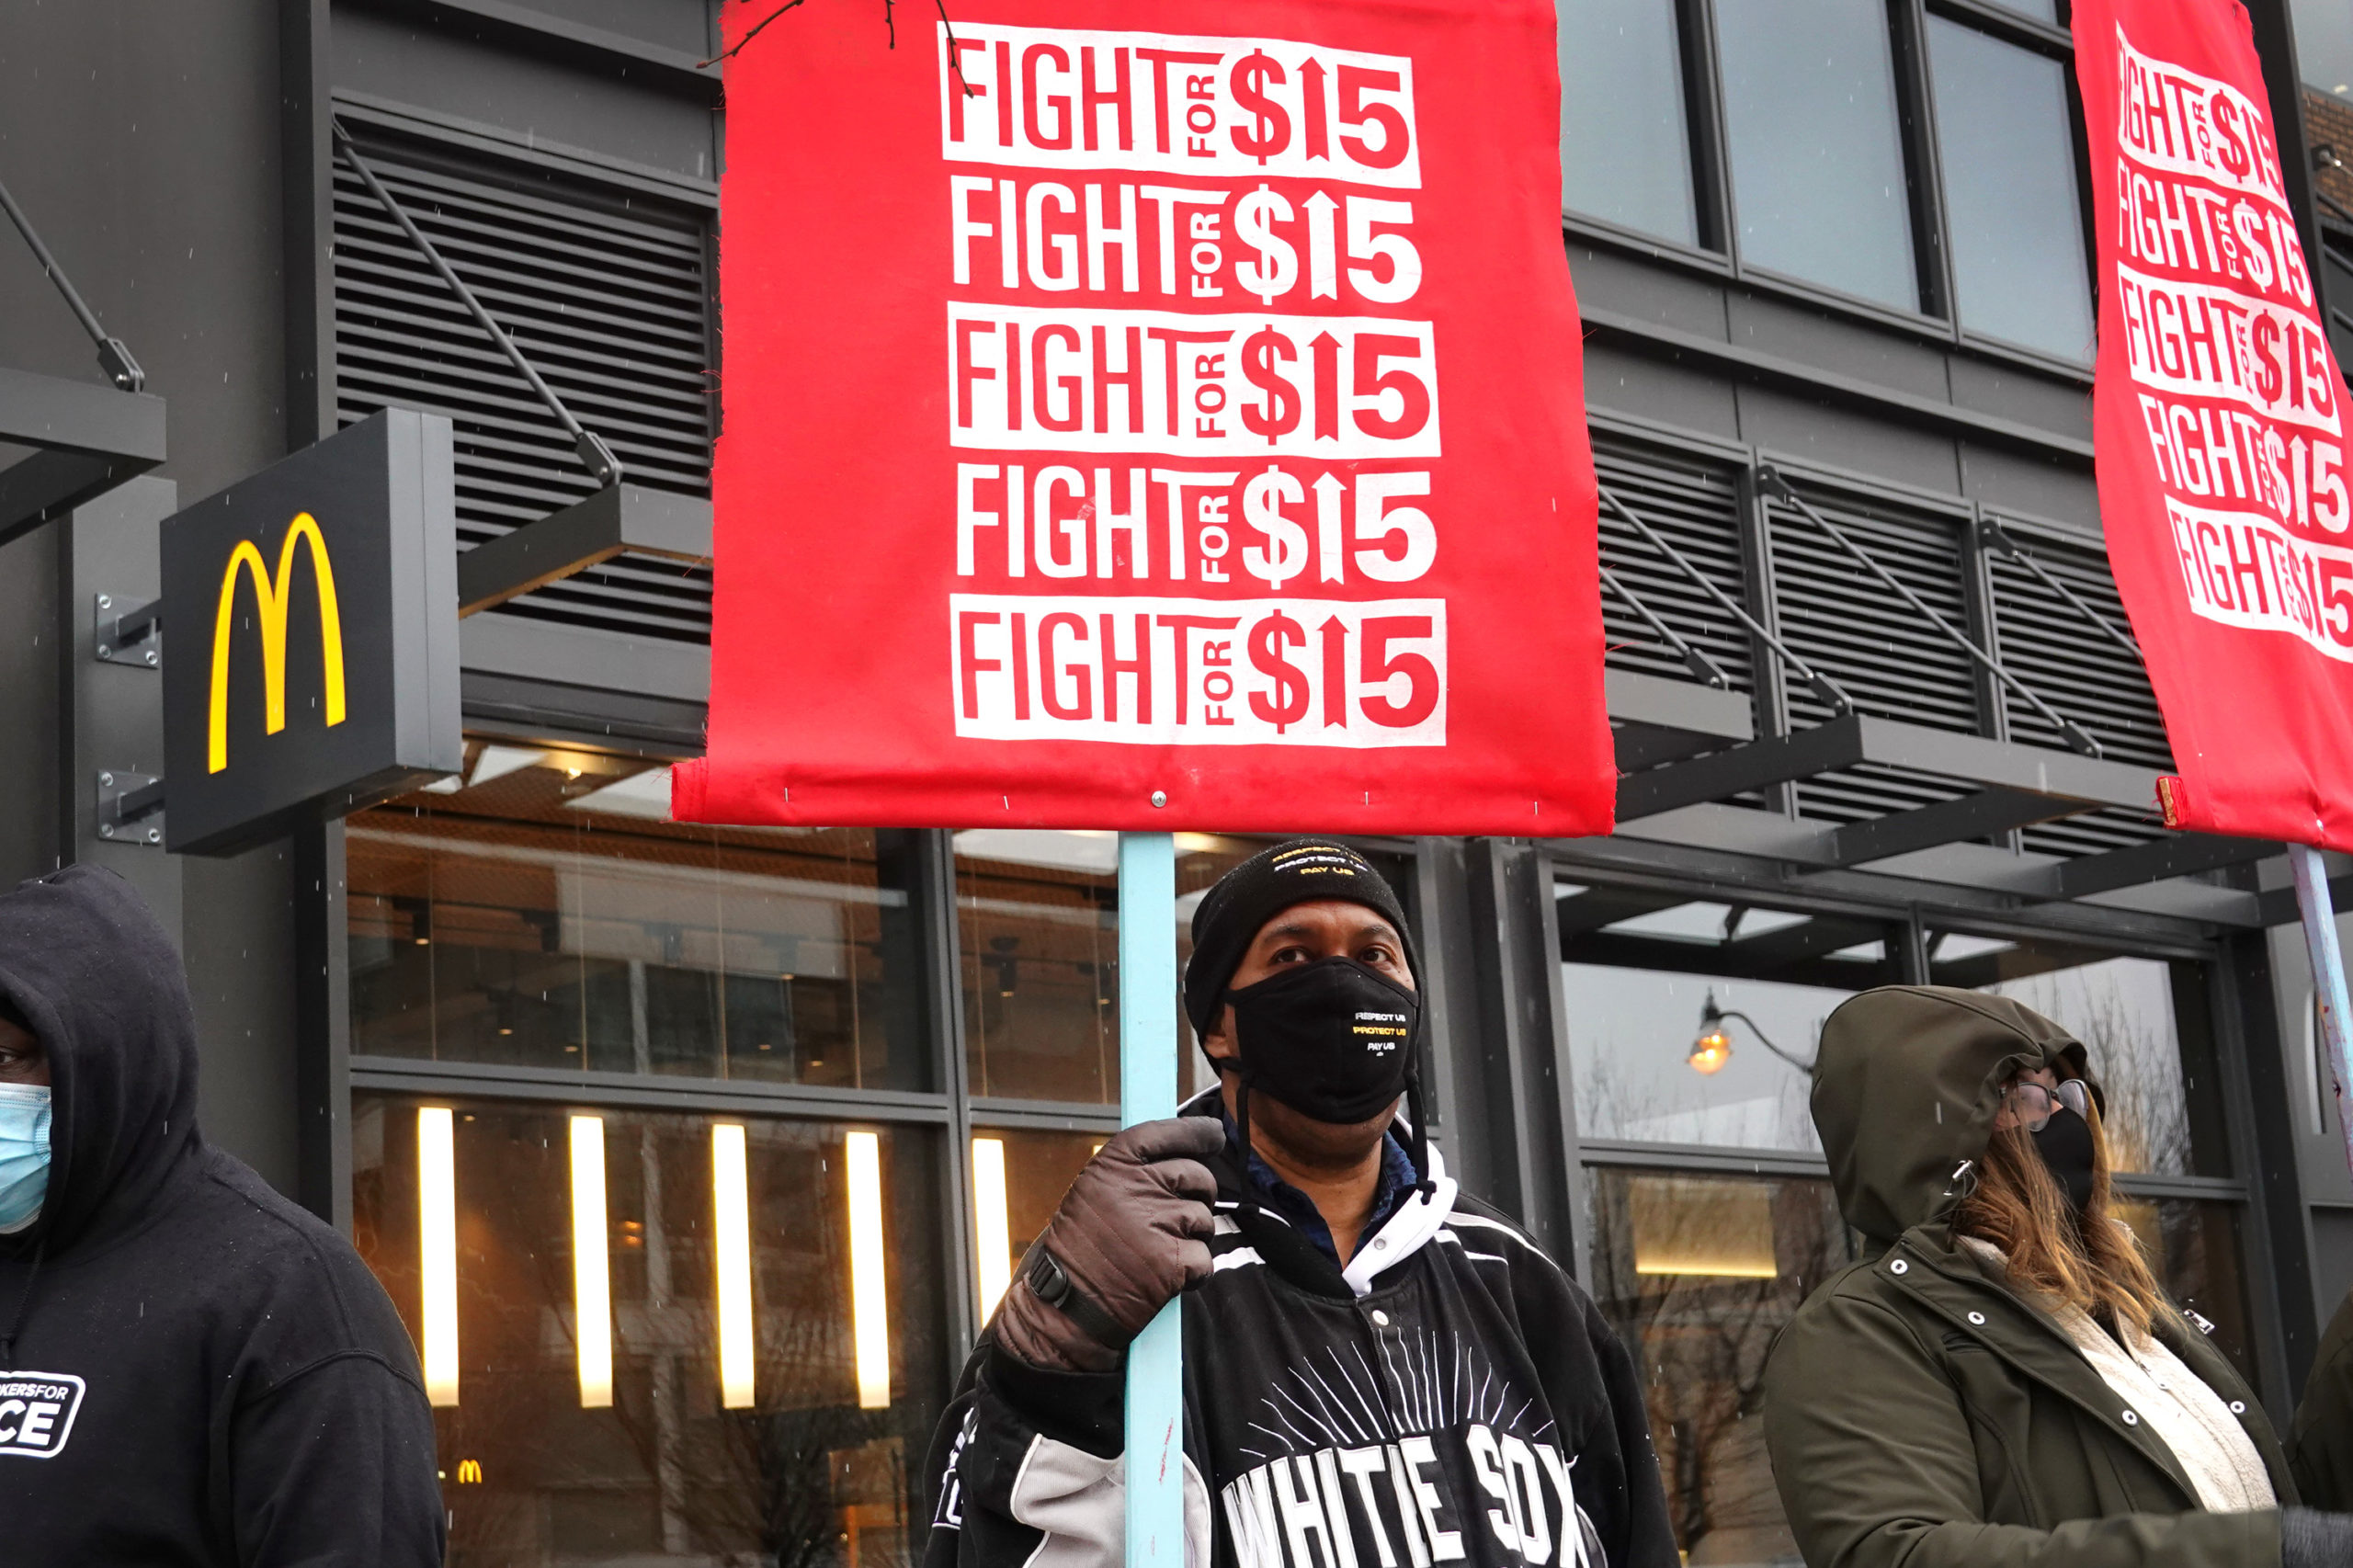 CHICAGO, ILLINOIS - JANUARY 15: Demonstrators participate in a protest outside of McDonald's corporate headquarters on January 15, 2021 in Chicago, Illinois. The protest was part of a nationwide effort calling for minimum wage to be raised to $15-per-hour. (Photo by Scott Olson/Getty Images)